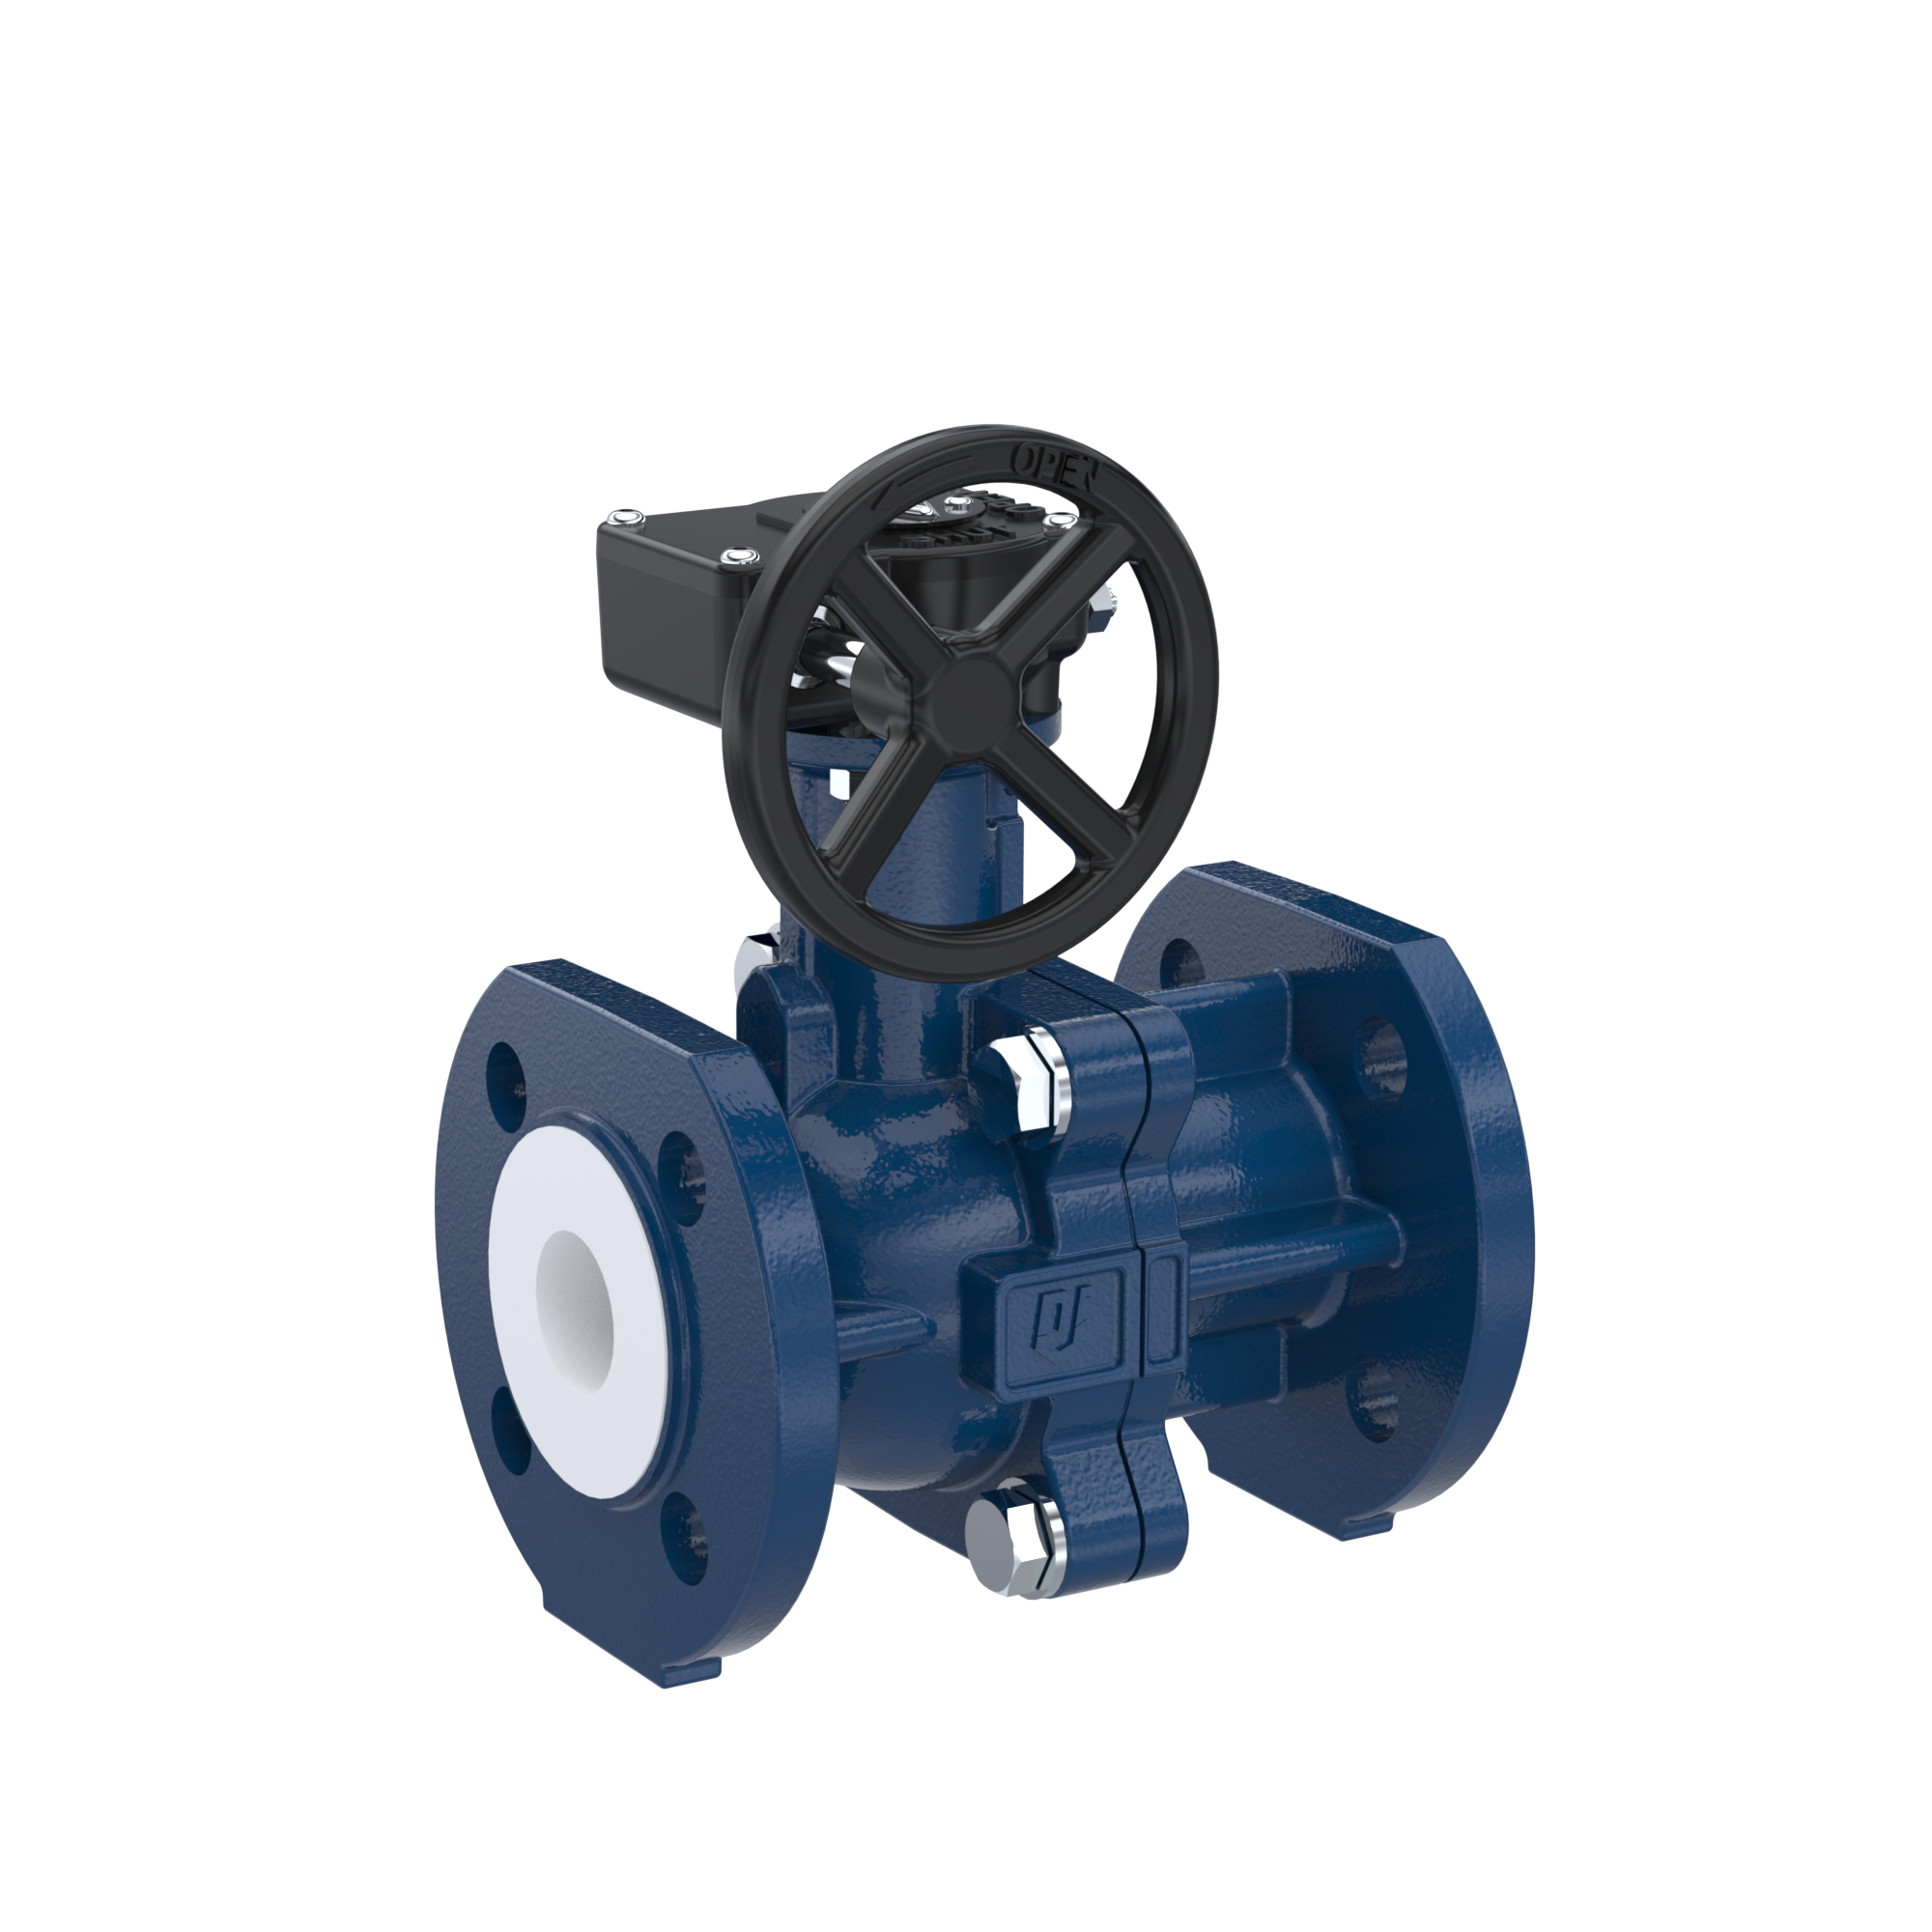 PFA-flange ball valve FK13 DN50 - 2" inch PN10/16 made of spheroidal graphite cast iron with worm gear